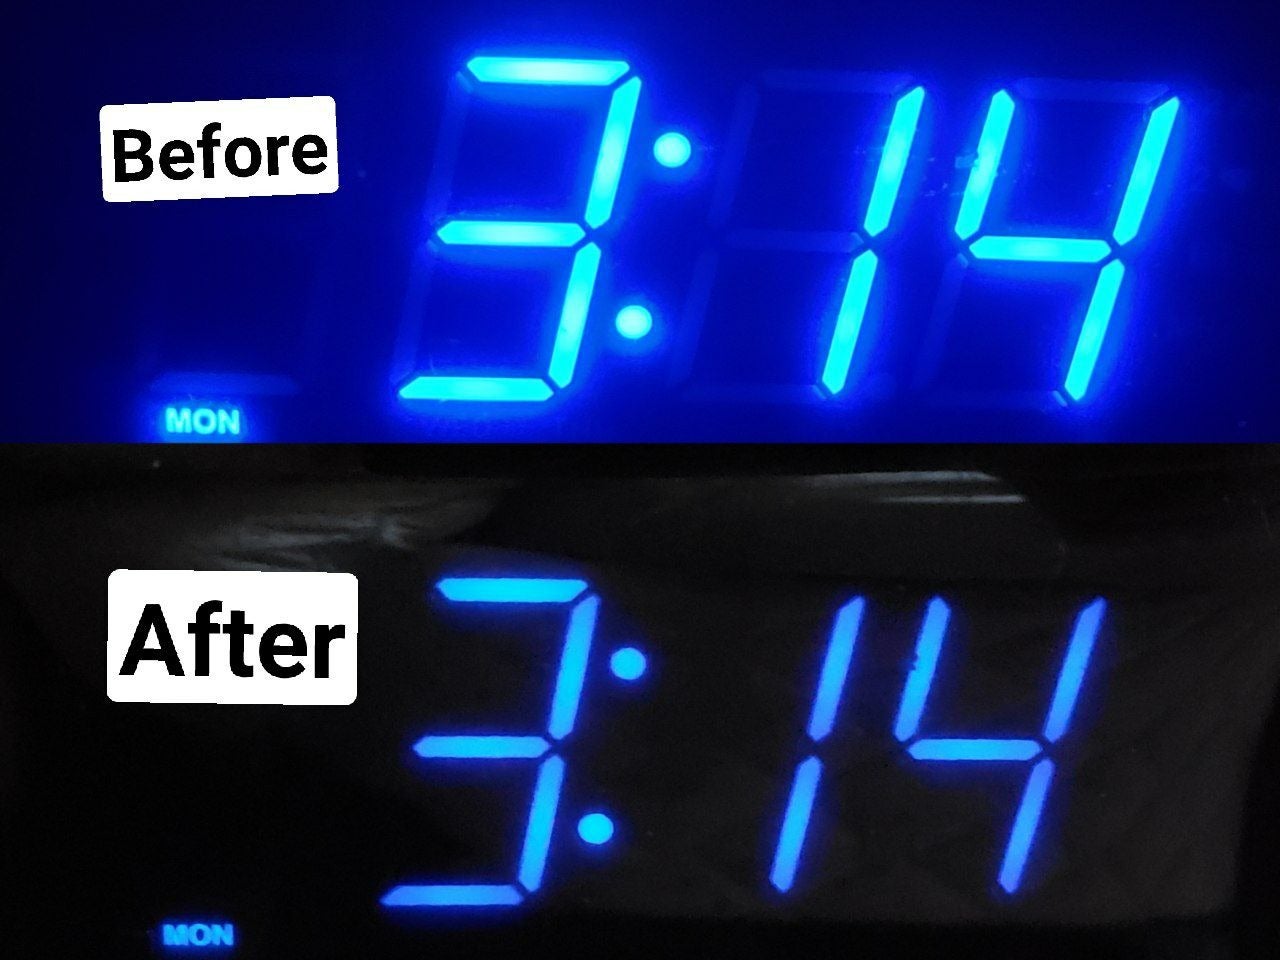 before and after reviewer images of a digital clock brightly telling the time and then dimly telling the time